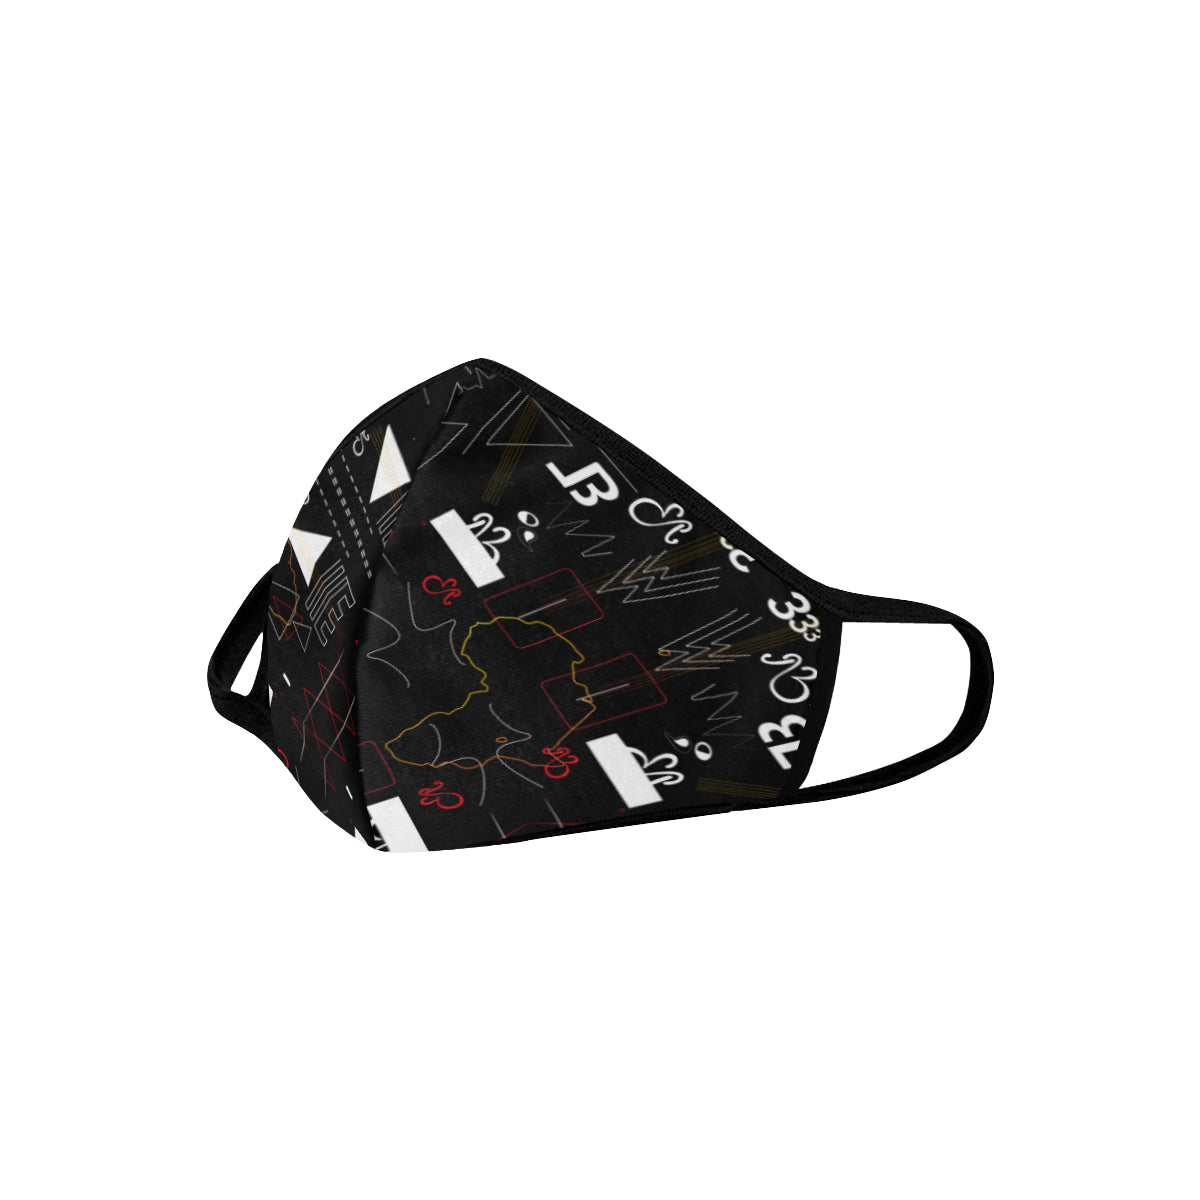 Linear Print Cotton Fabric Face Mask with filter slot (30 Filters Included) - Non-medical use